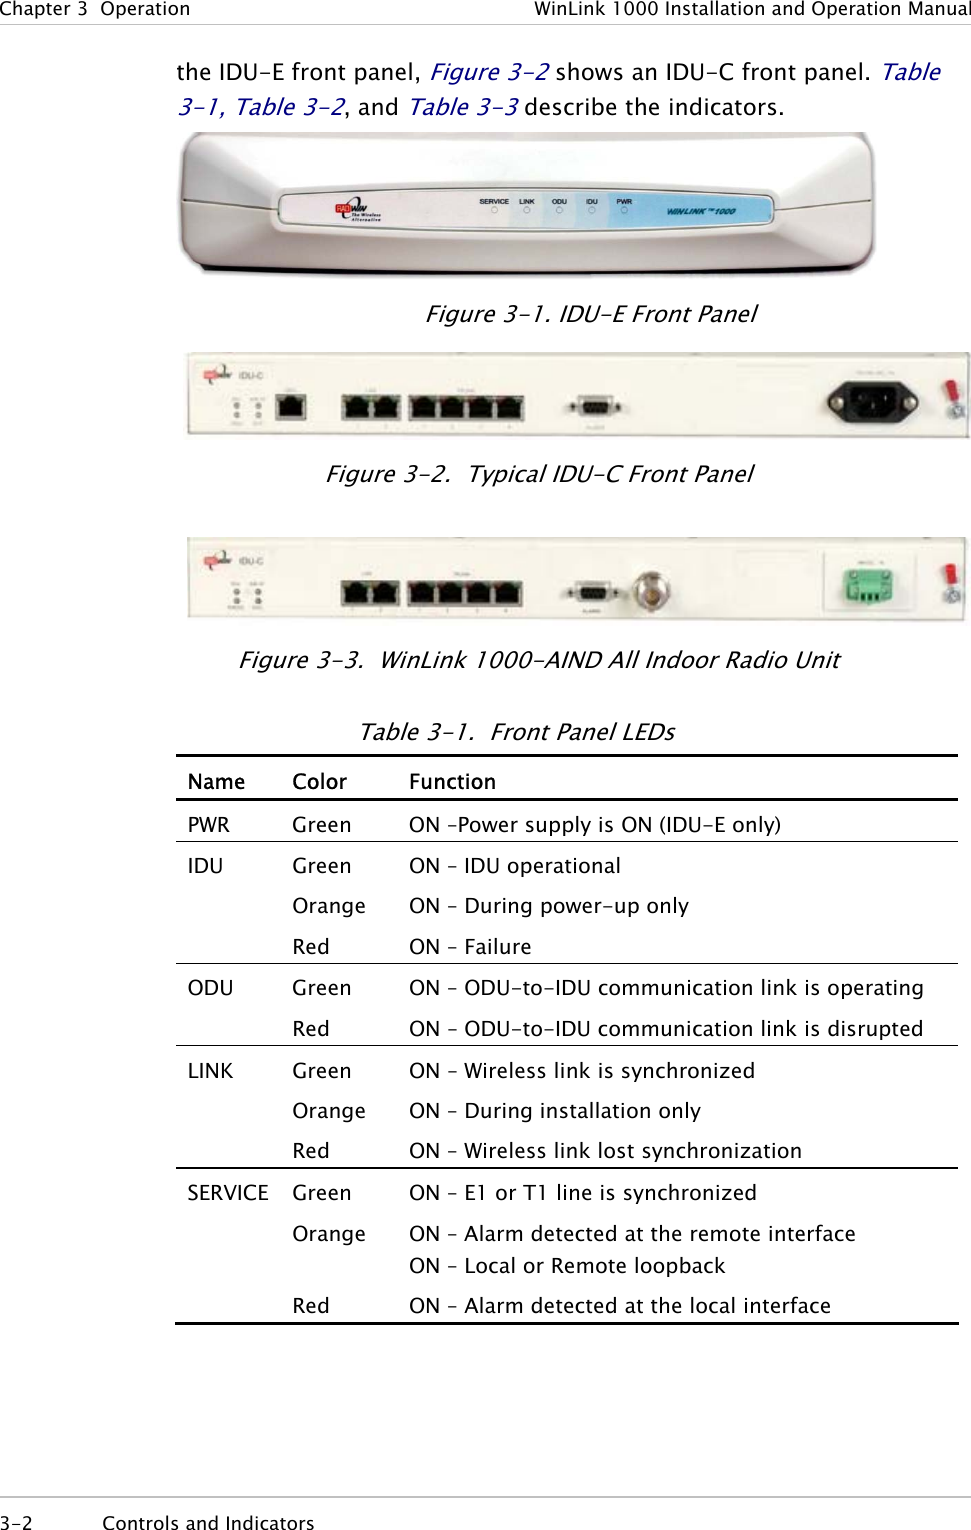 Chapter  3  Operation  WinLink 1000 Installation and Operation Manual the IDU-E front panel, Figure  3-2 shows an IDU-C front panel. Table  3-1, Table  3-2, and Table  3-3 describe the indicators.  Figure  3-1. IDU-E Front Panel  Figure  3-2.  Typical IDU-C Front Panel  Figure  3-3.  WinLink 1000-AIND All Indoor Radio Unit Table  3-1.  Front Panel LEDs Name Color  Function PWR  Green  ON –Power supply is ON (IDU-E only) IDU Green Orange Red ON – IDU operational ON – During power-up only ON – Failure ODU Green Red ON – ODU-to-IDU communication link is operating ON – ODU-to-IDU communication link is disrupted  LINK Green Orange Red ON – Wireless link is synchronized ON – During installation only ON – Wireless link lost synchronization SERVICE Green Orange  Red ON – E1 or T1 line is synchronized ON – Alarm detected at the remote interface ON – Local or Remote loopback ON – Alarm detected at the local interface 3-2 Controls and Indicators  